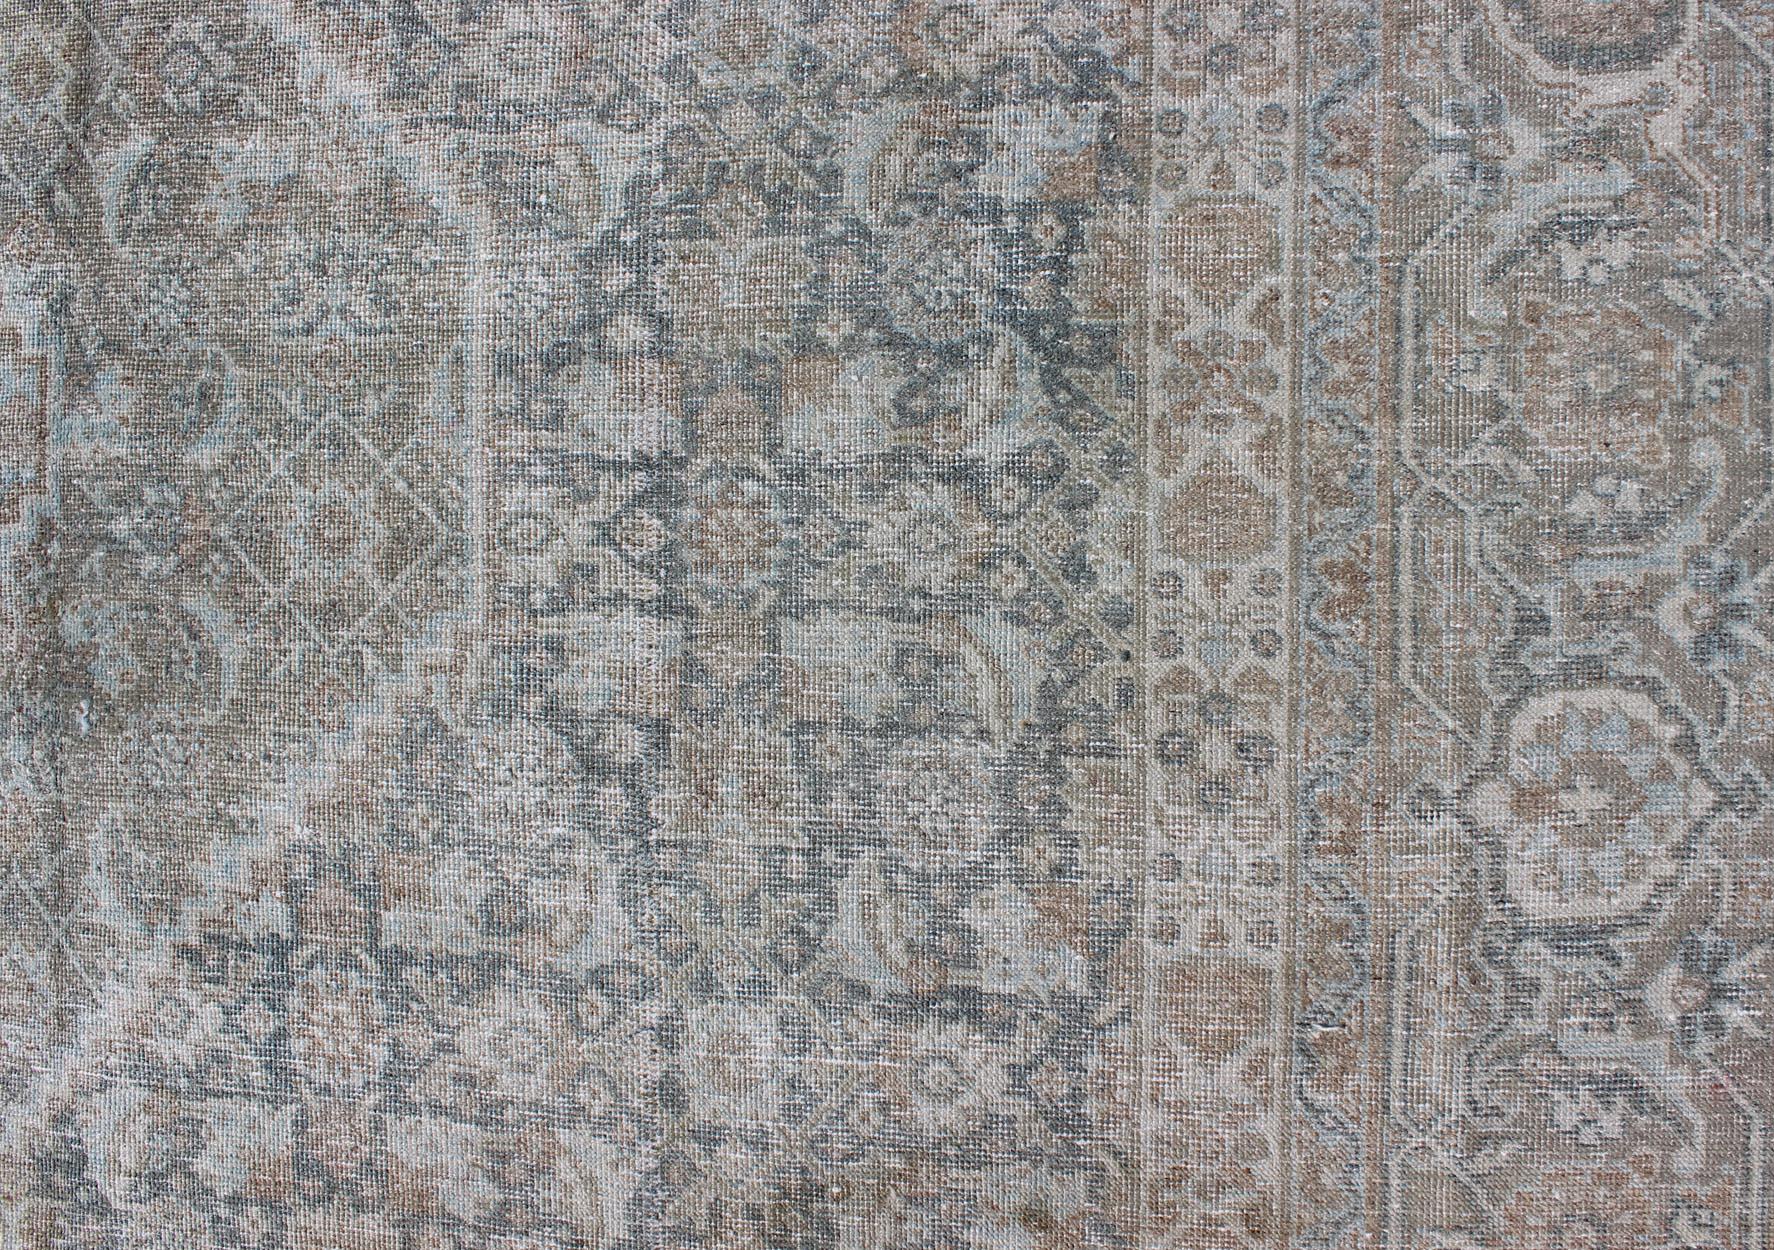 Antique Persian Tabriz Rug in Muted Colors with Layered Medallion Design 2